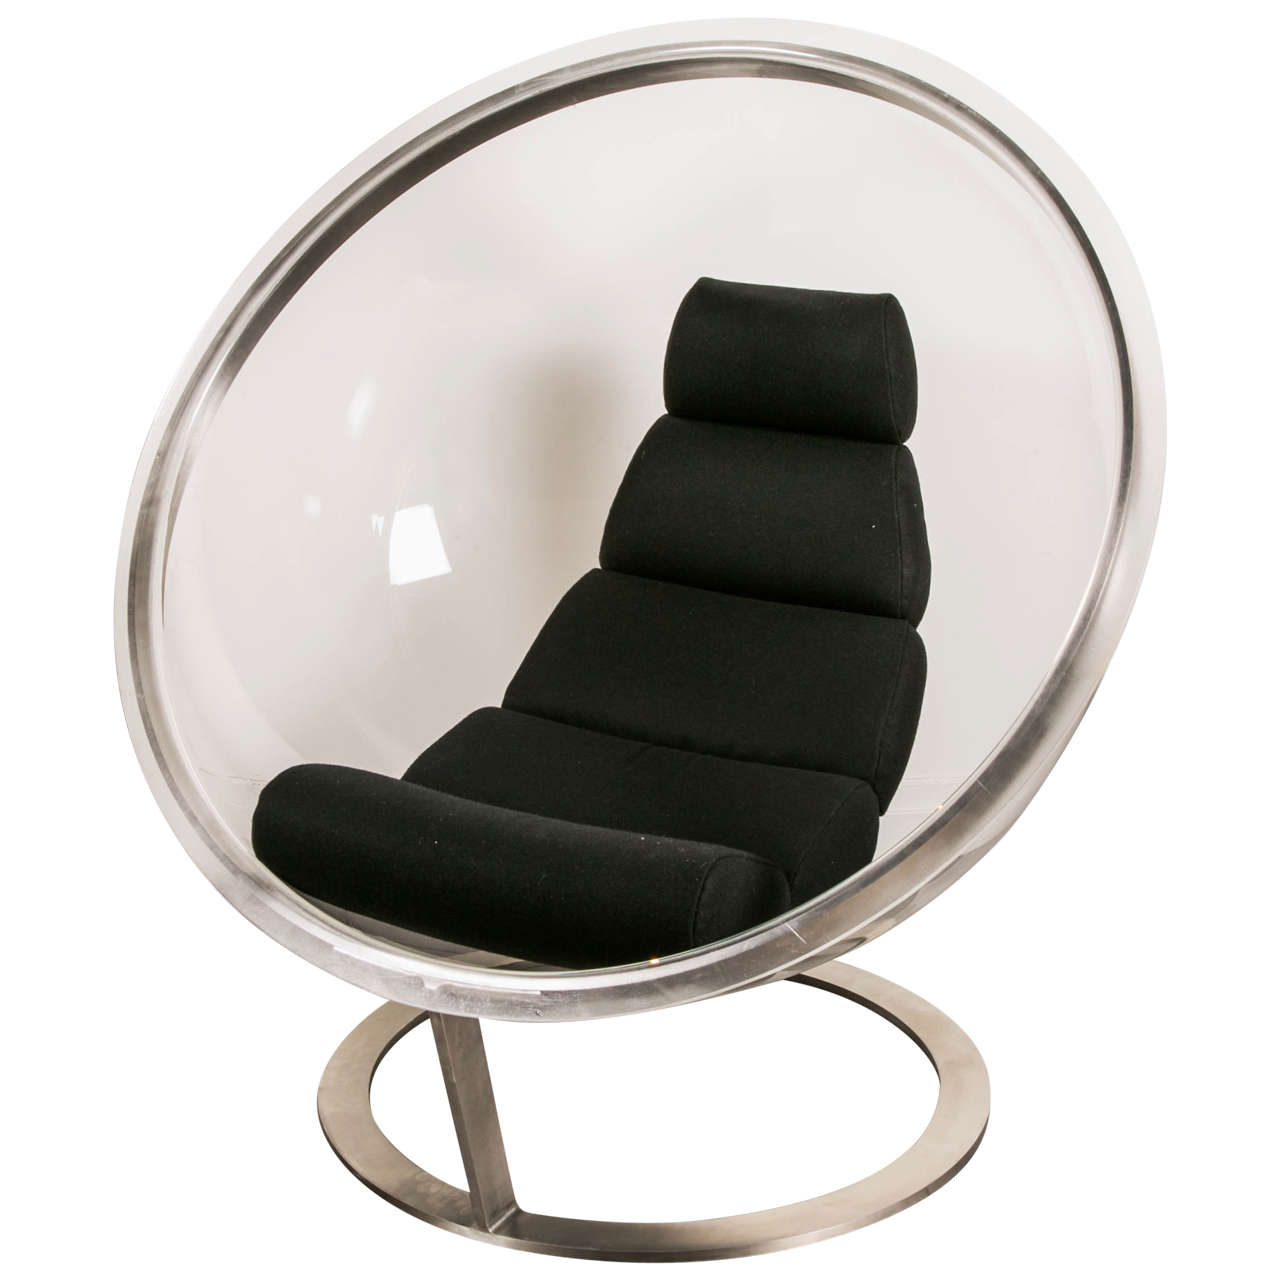 Christian Daninos, Lounge Chair "Bubble", 1968 For Sale